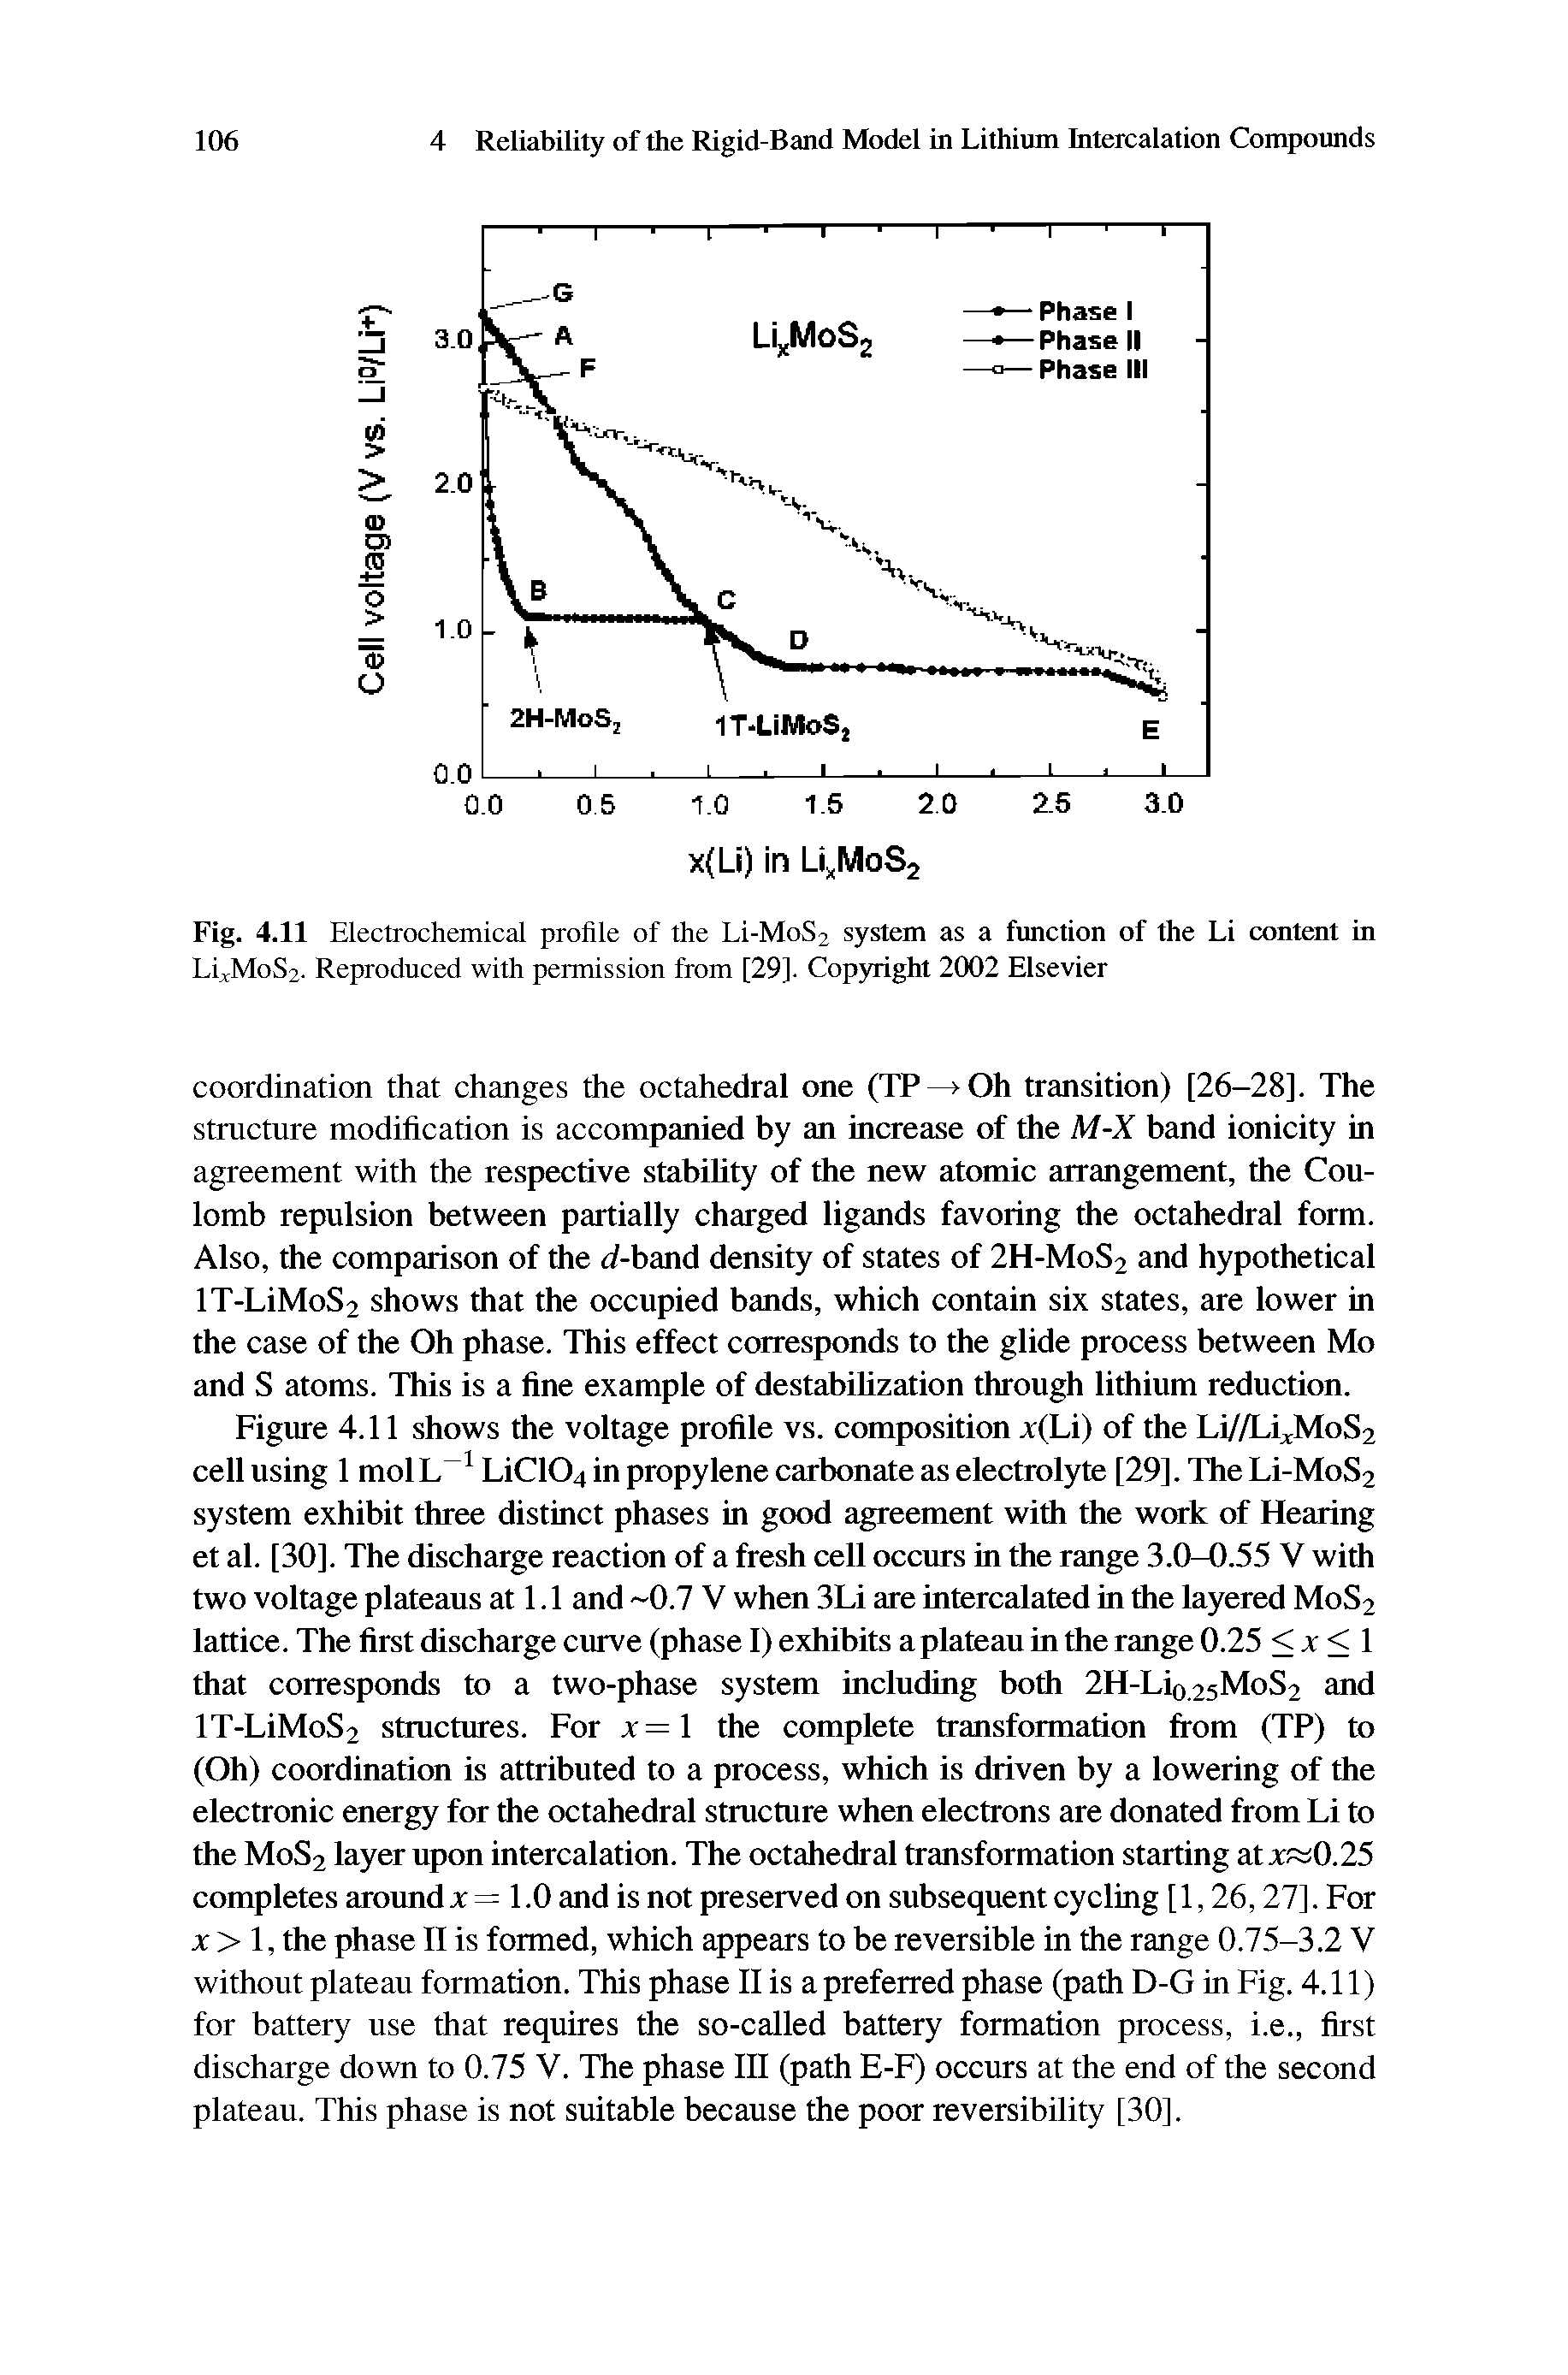 Fig. 4.11 Electrochemical profile of the Li-MoS2 system as a fimction of the Li content in Li MoS2. Reproduced with permission from [29]. Copyright 2002 Elsevier...